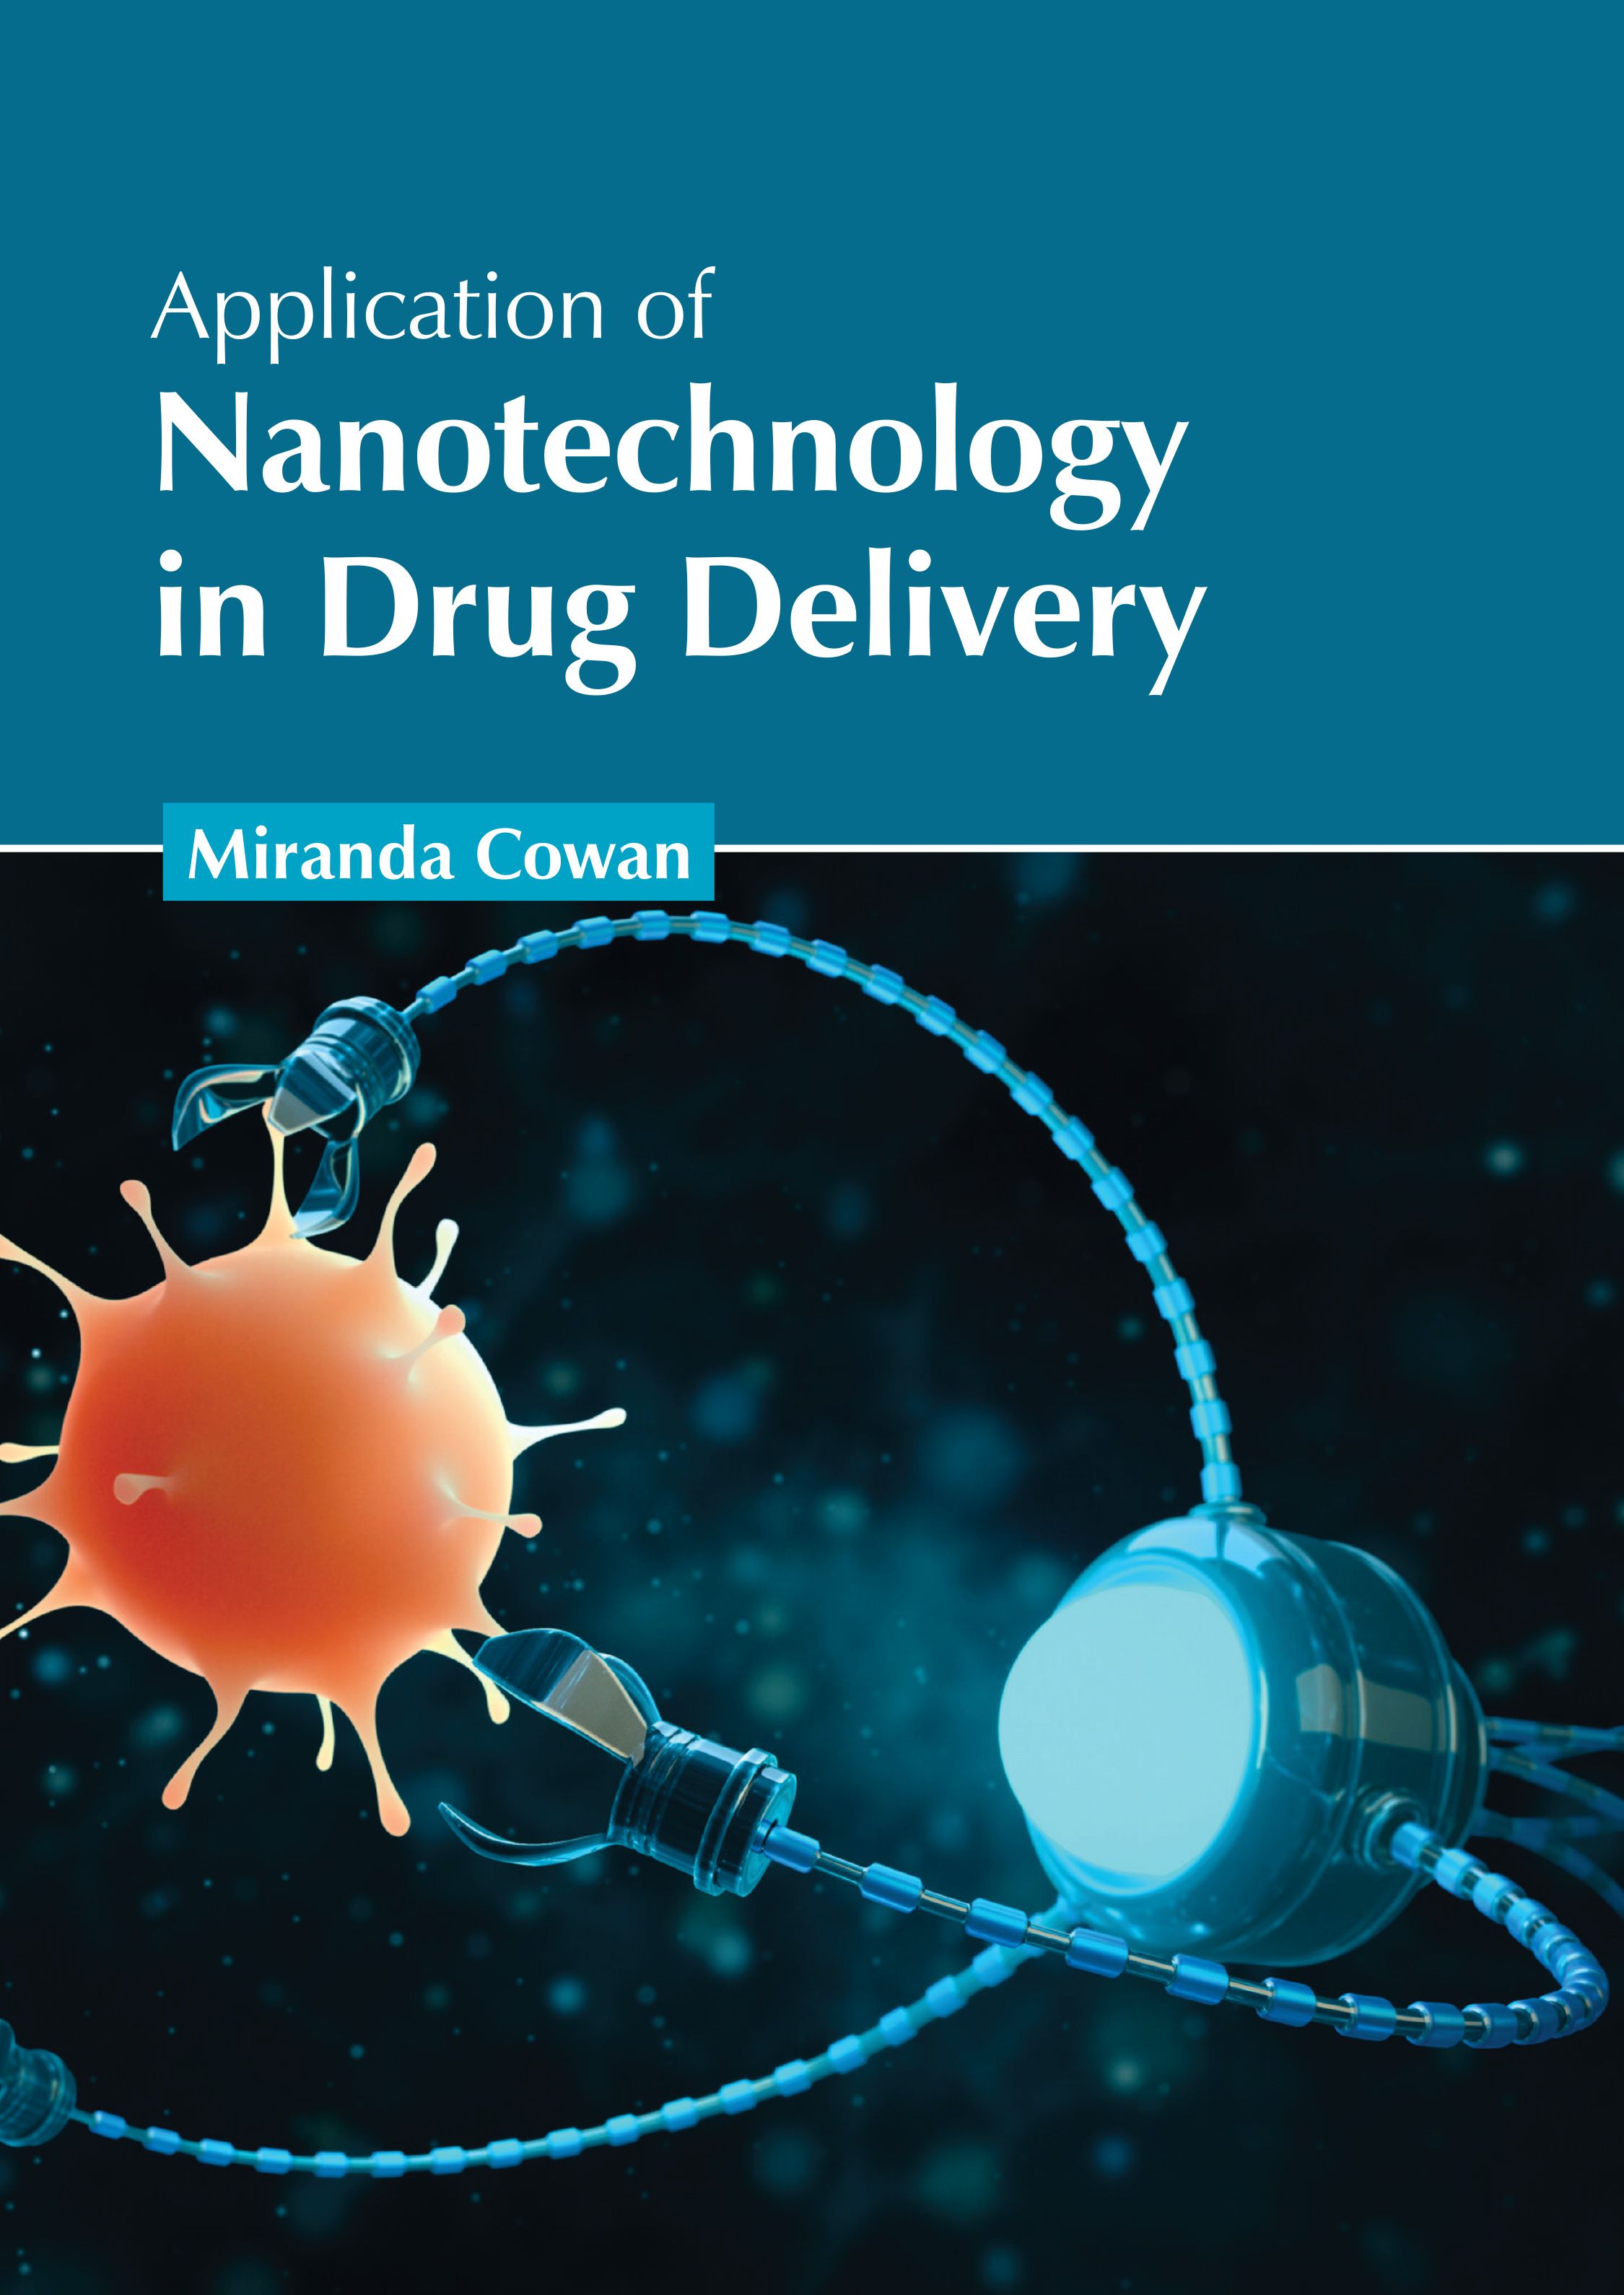 APPLICATION OF NANOTECHNOLOGY IN DRUG DELIVERY